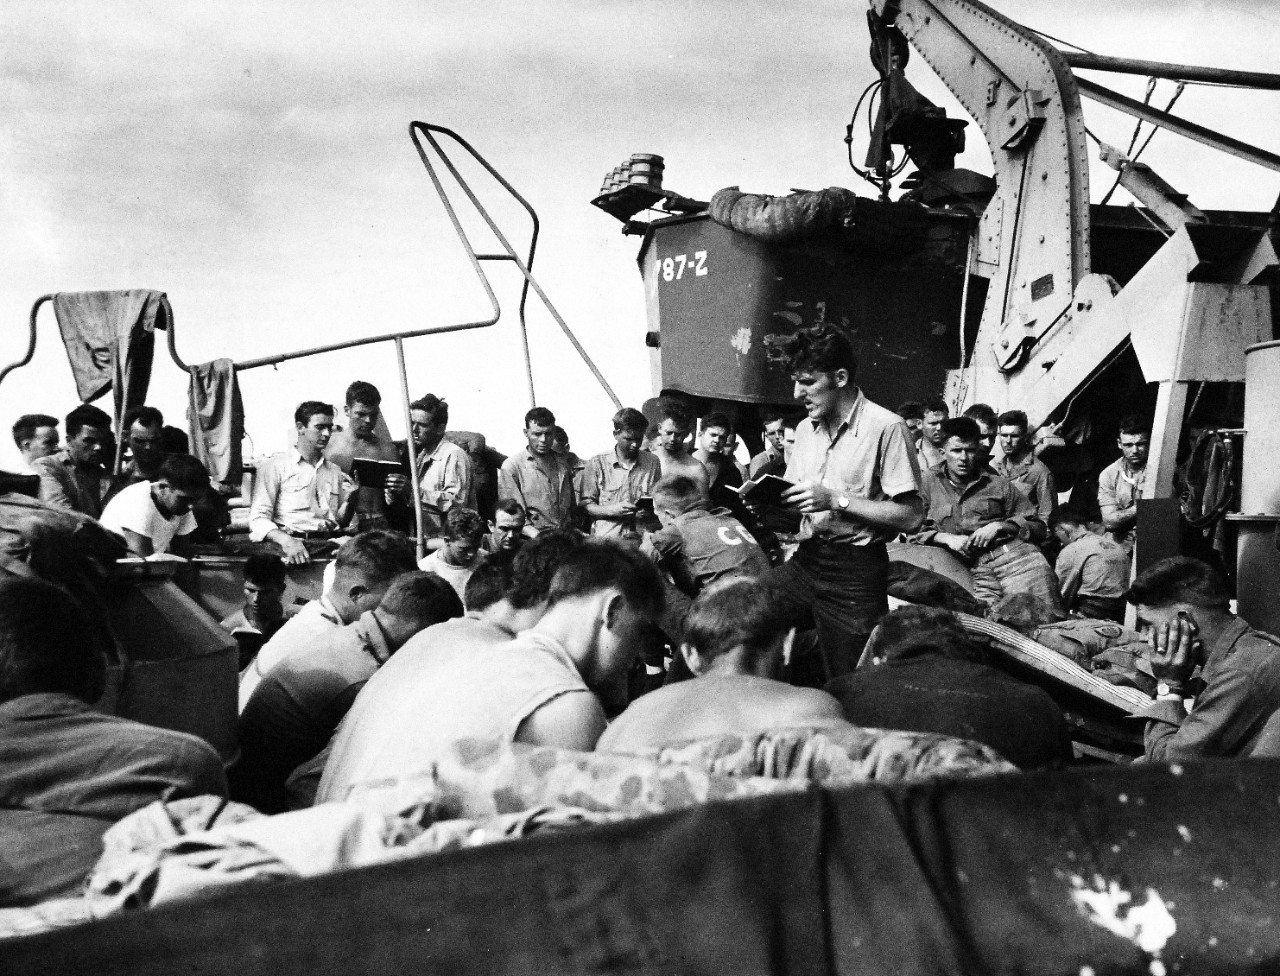 80-G-304870:  Battle for Iwo Jima, February 19, 1945. PHoM2/C Charles R. Roth, USCG, leads hymn singing and gives brief talk to his shipmates aboard a Coast Guard-manner LST the day before landing on Iwo Jima.   Photographed February 18, 1945.  Official U.S. Navy Photograph now in the collections of the National Archives.  (2016/01/19).